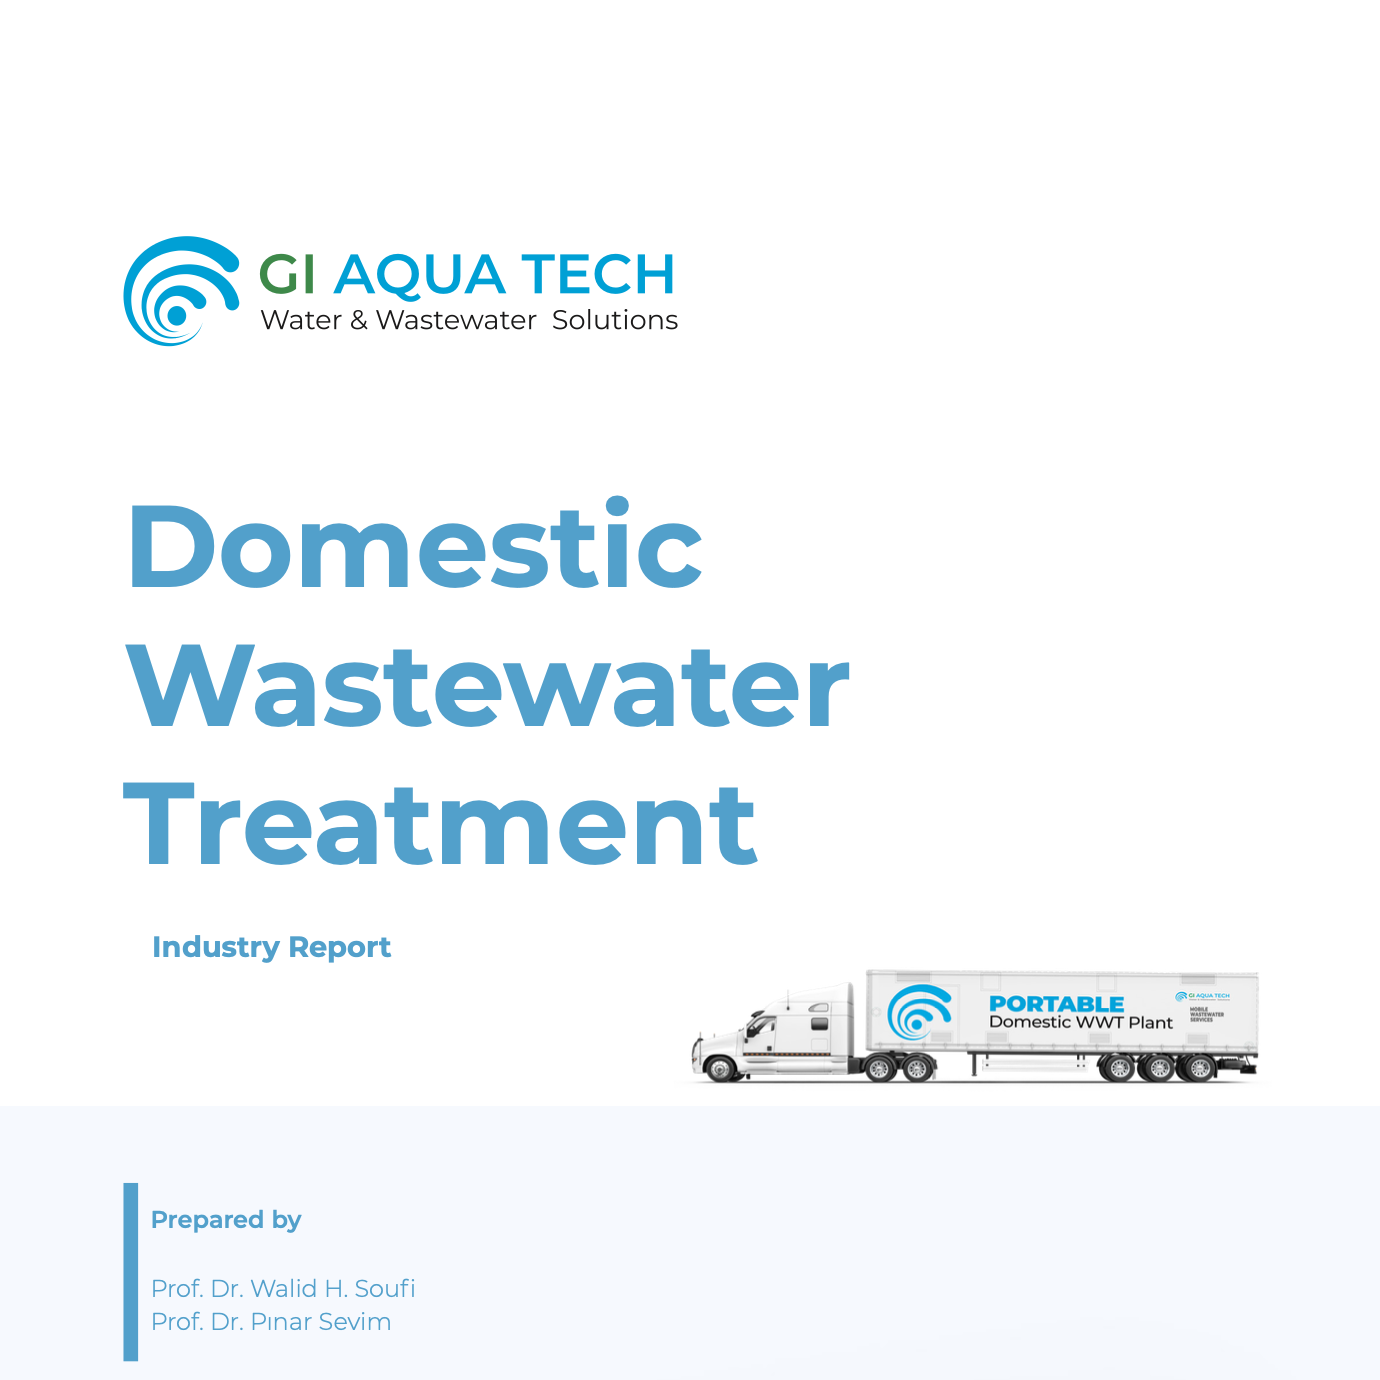 A new generation of domestic wastewater treatment plants